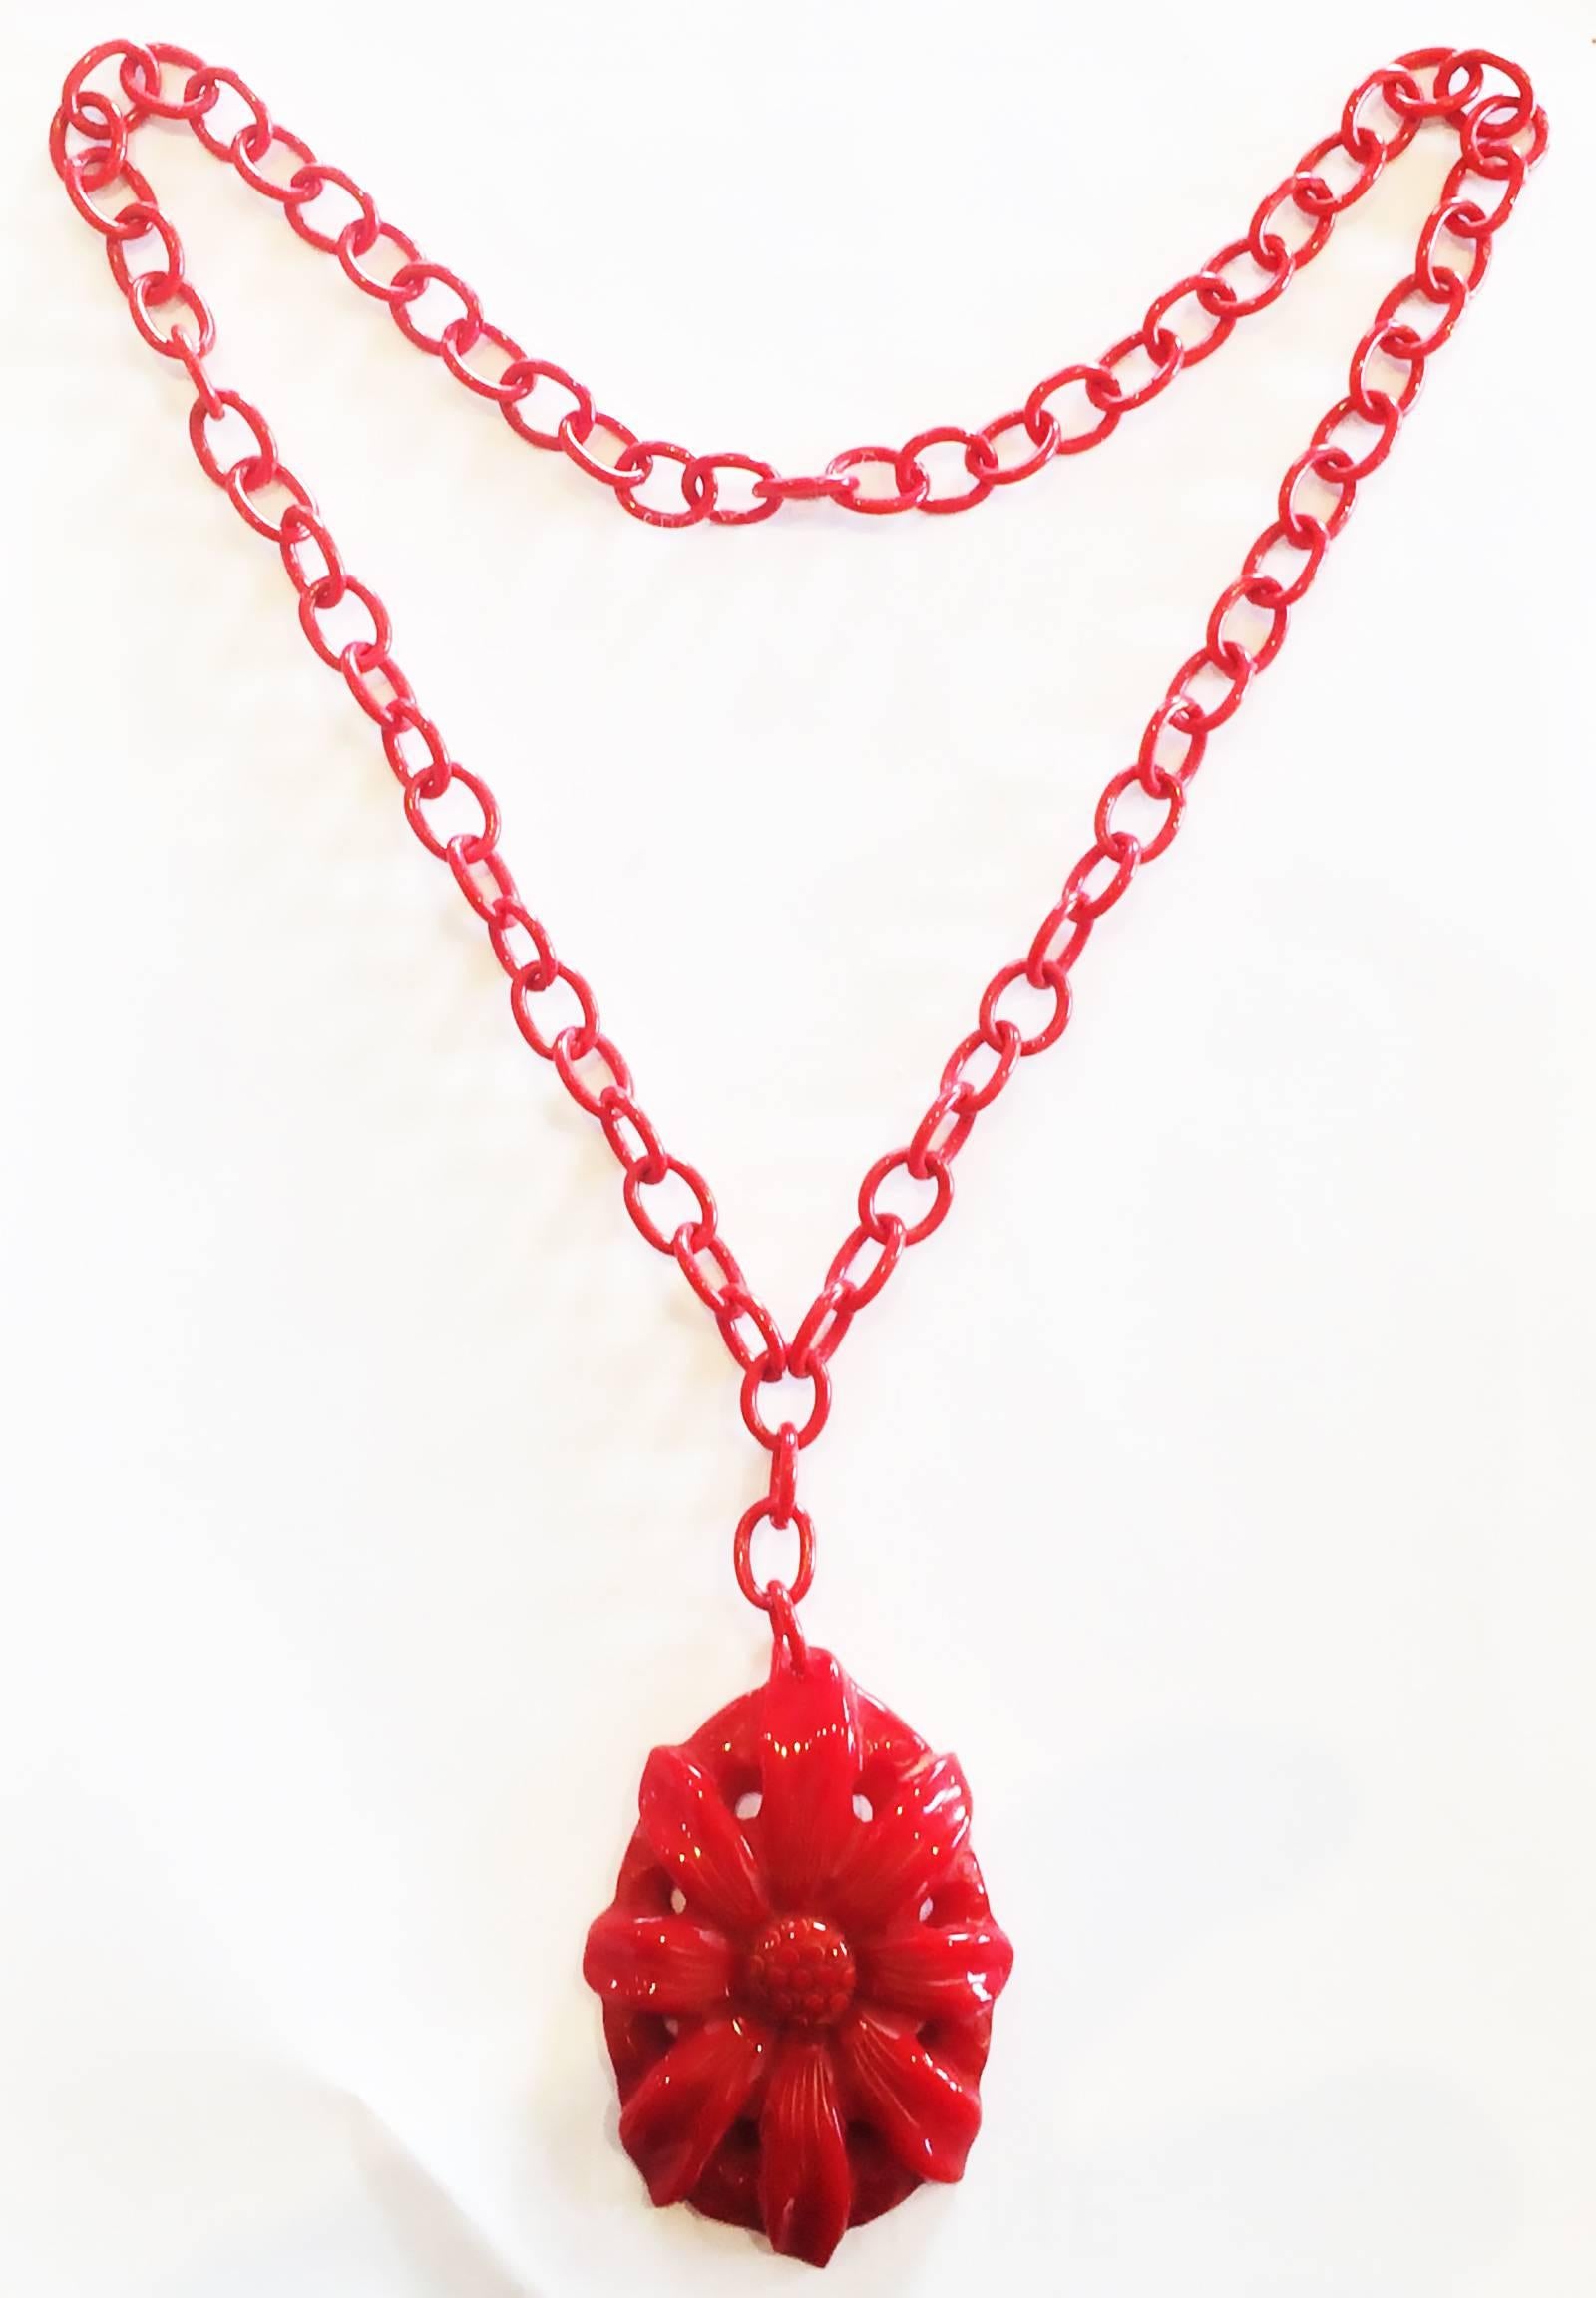 Art Deco Necklace with large Pendant of Brilliant Red Bakelite, heavily carved with a Daisy to the pendant, and still with its perfect, matching red, Celluloid chain. No damage or restoration to Pendant or Chain all in original condition (no metal